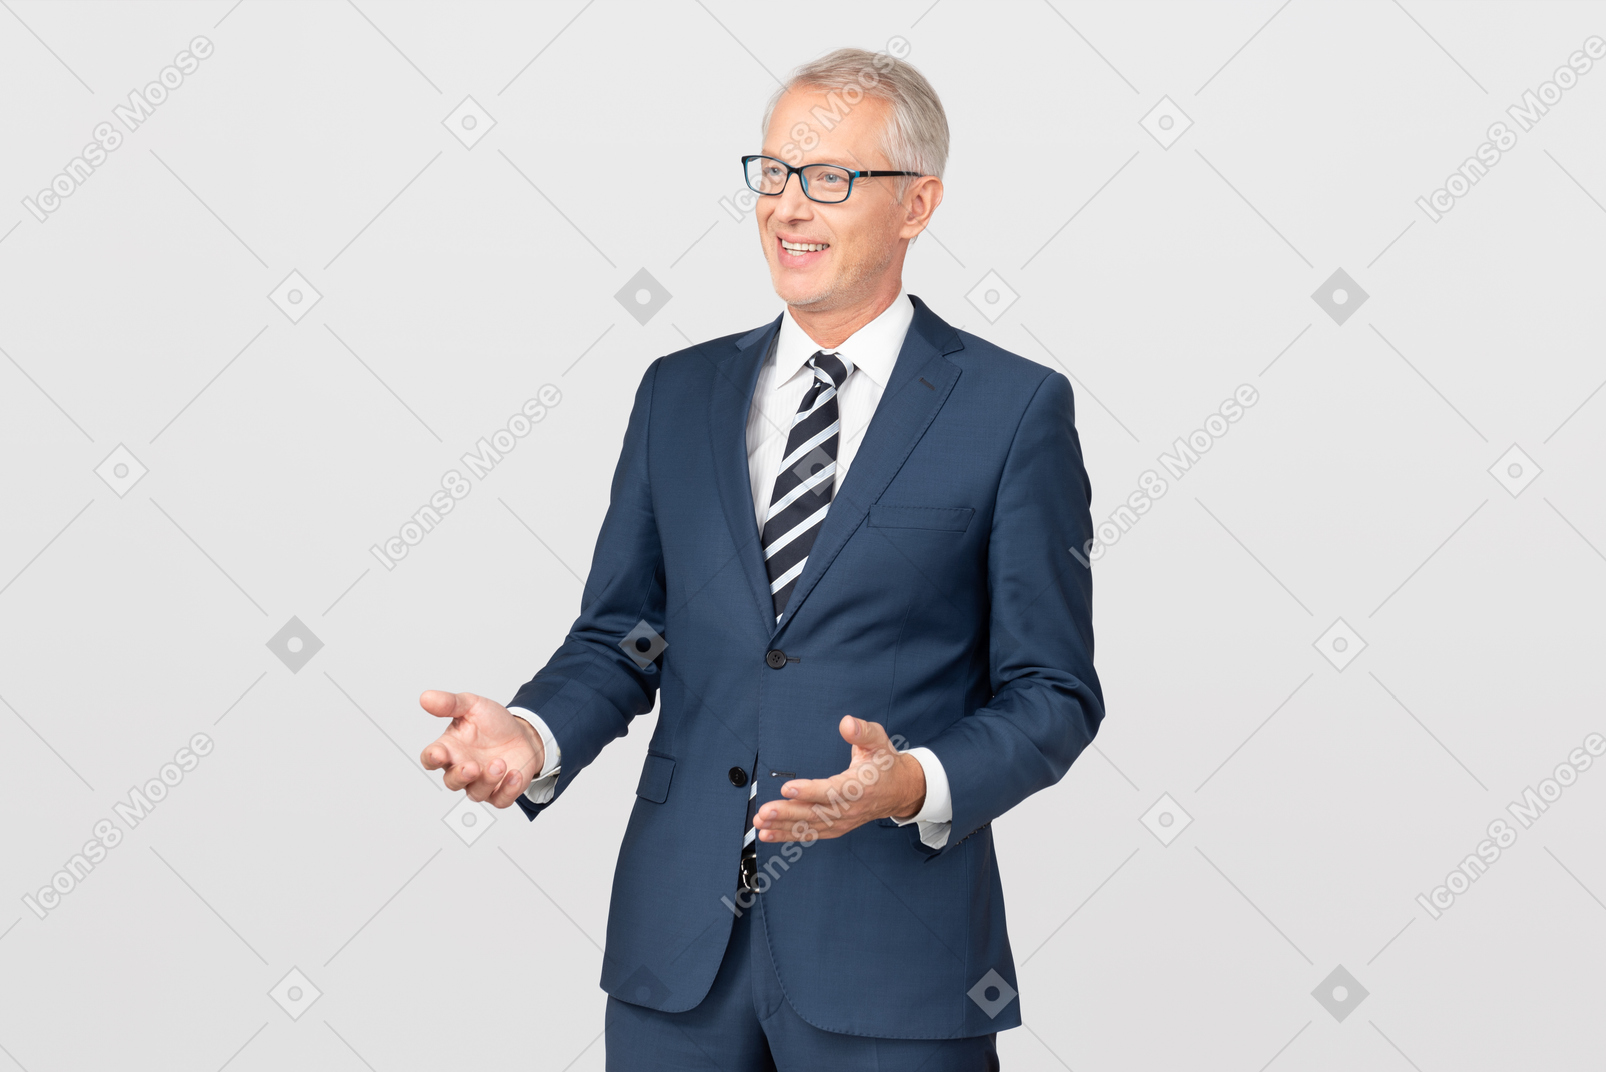 Smiling middle aged businessman standing with his hands spread